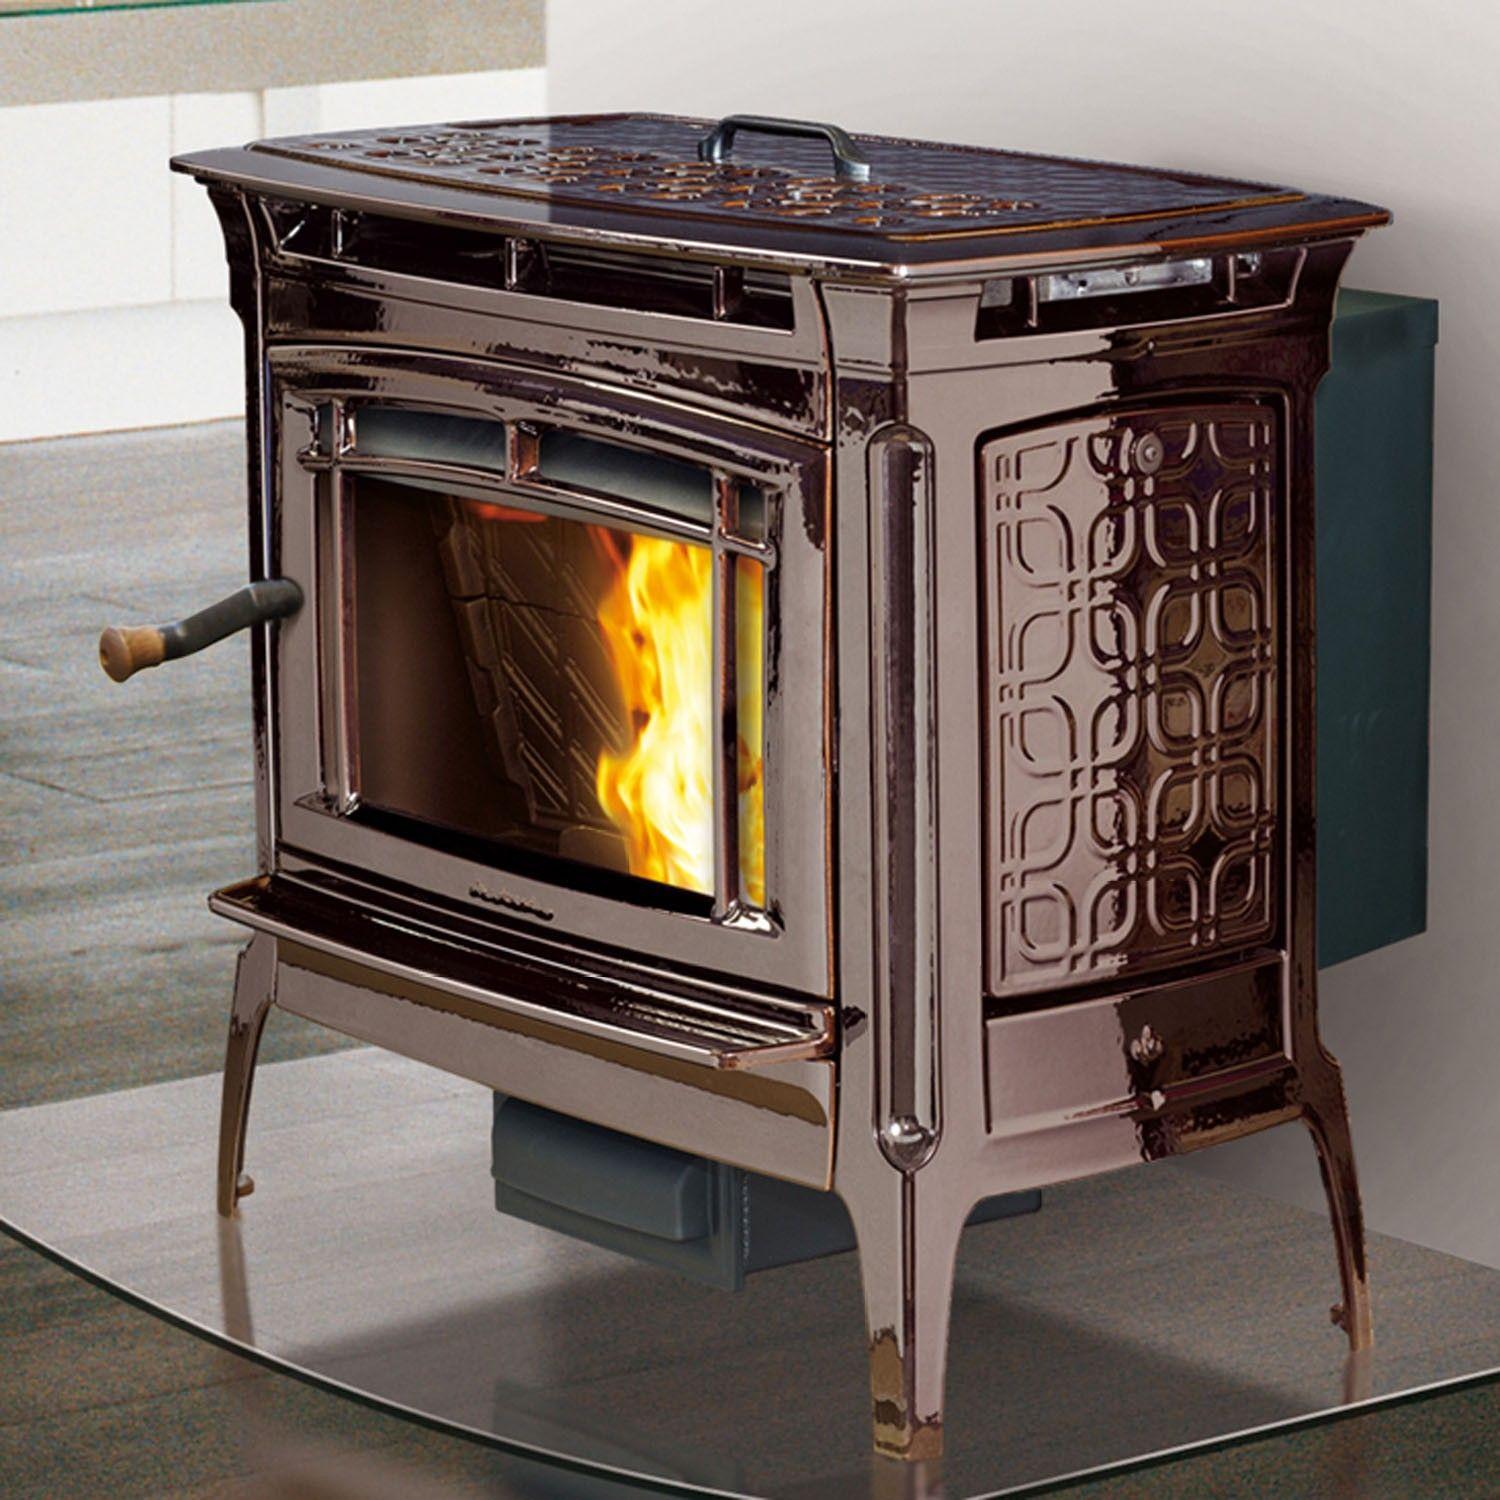 Harman Stove Logo - Hearthstone Manchester Wood Pellet Stove - Martin Sales and Service